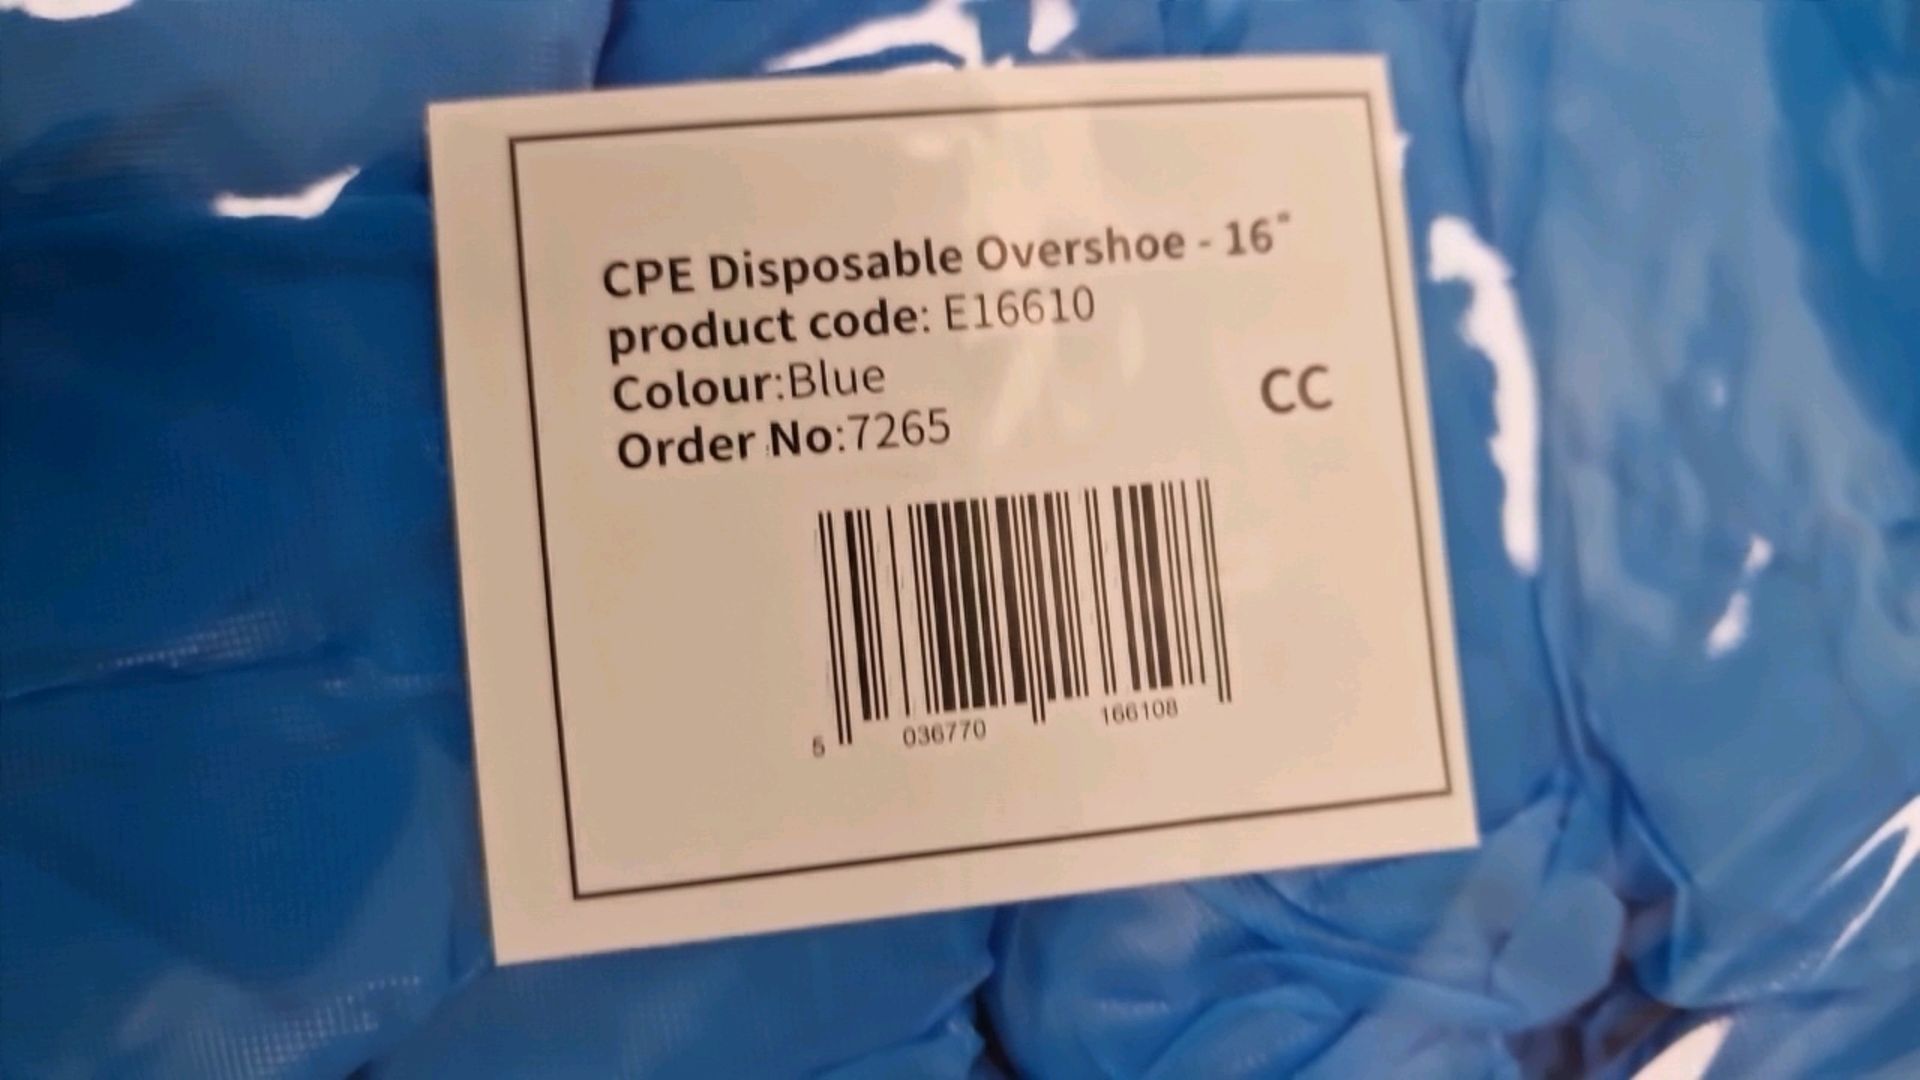 CPE Disposable Overshoe - Image 3 of 3